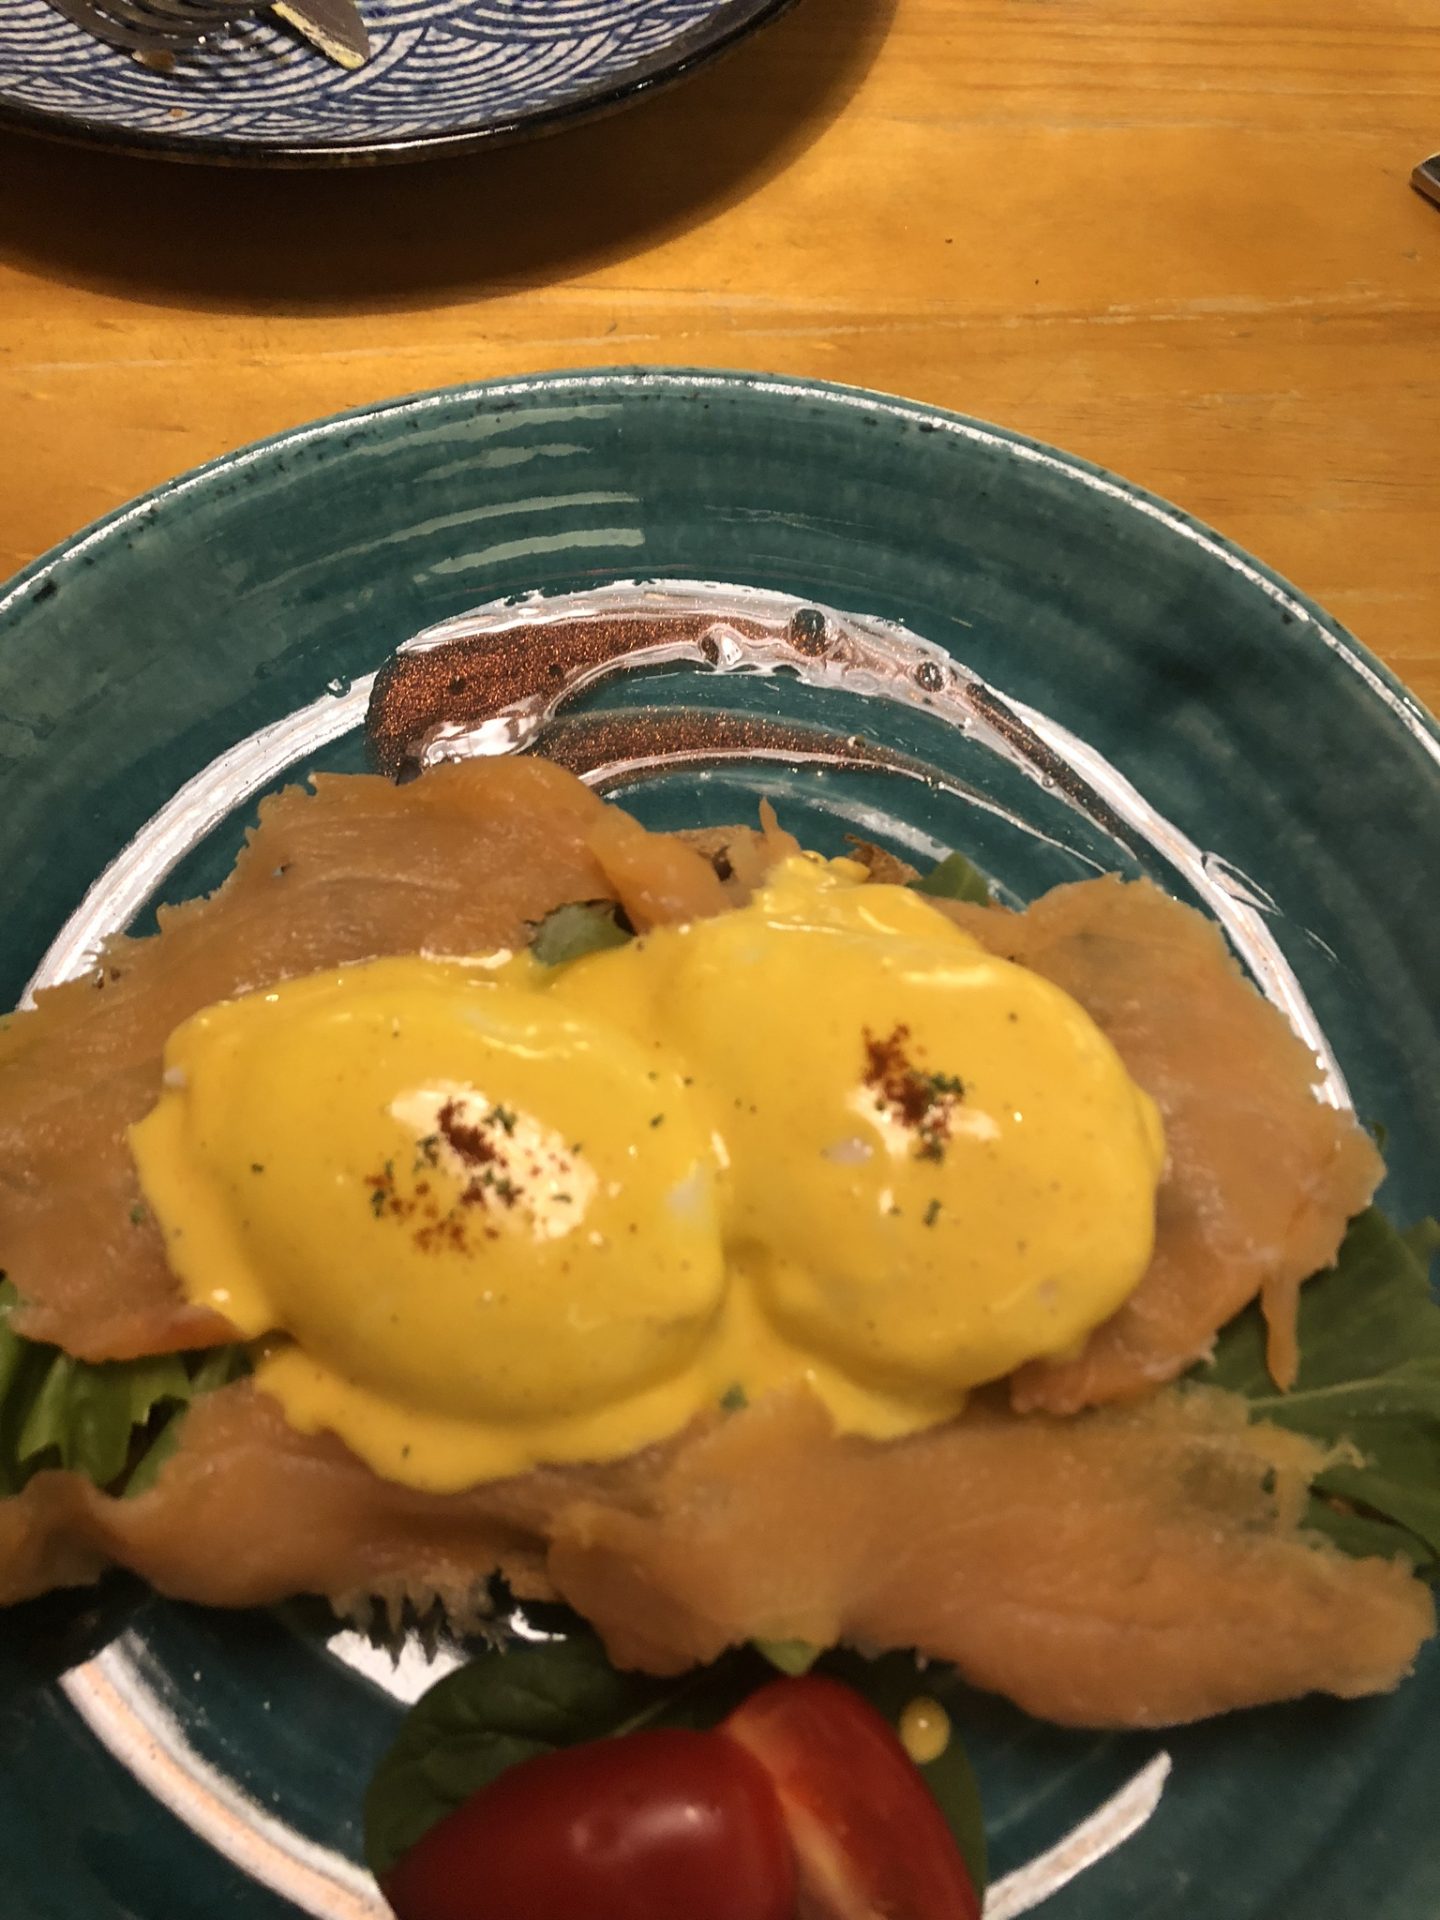 Eggs benedict from Black Sugar Coffee and Lifestyle, Kowloon